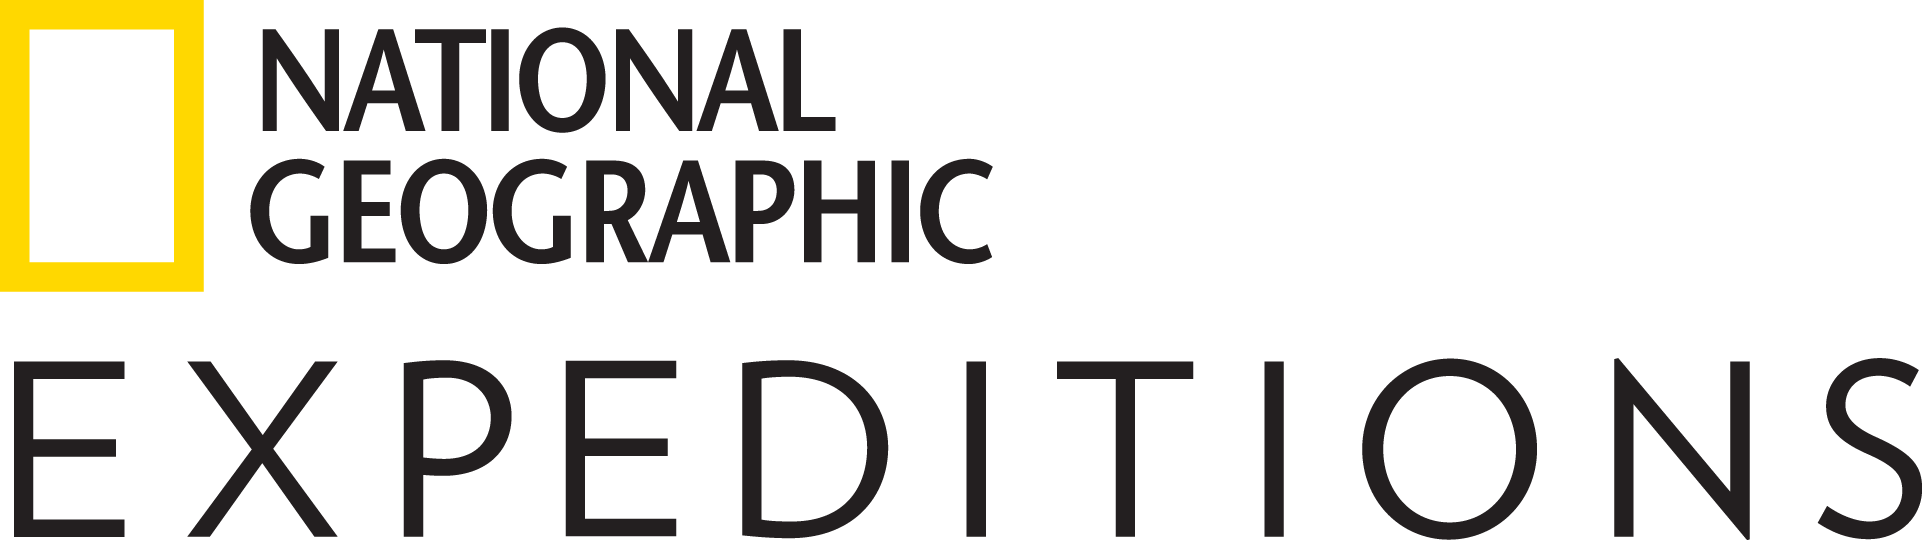 National Geographic Expeditions Logo PNG